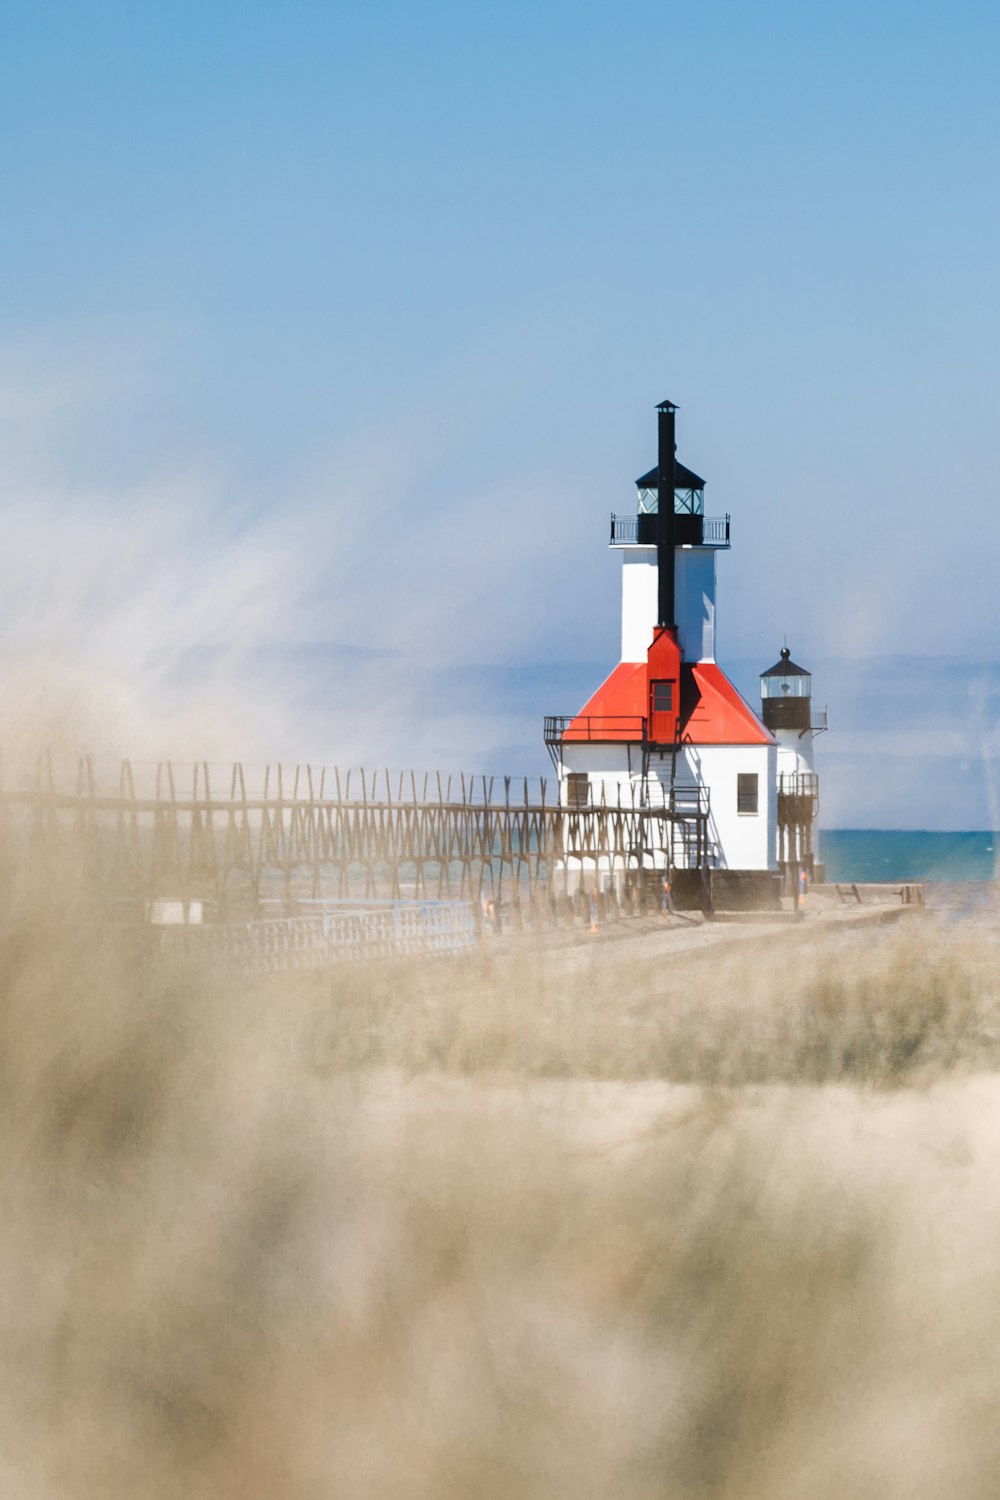 a red and white lighthouse sitting on top of a sandy beach